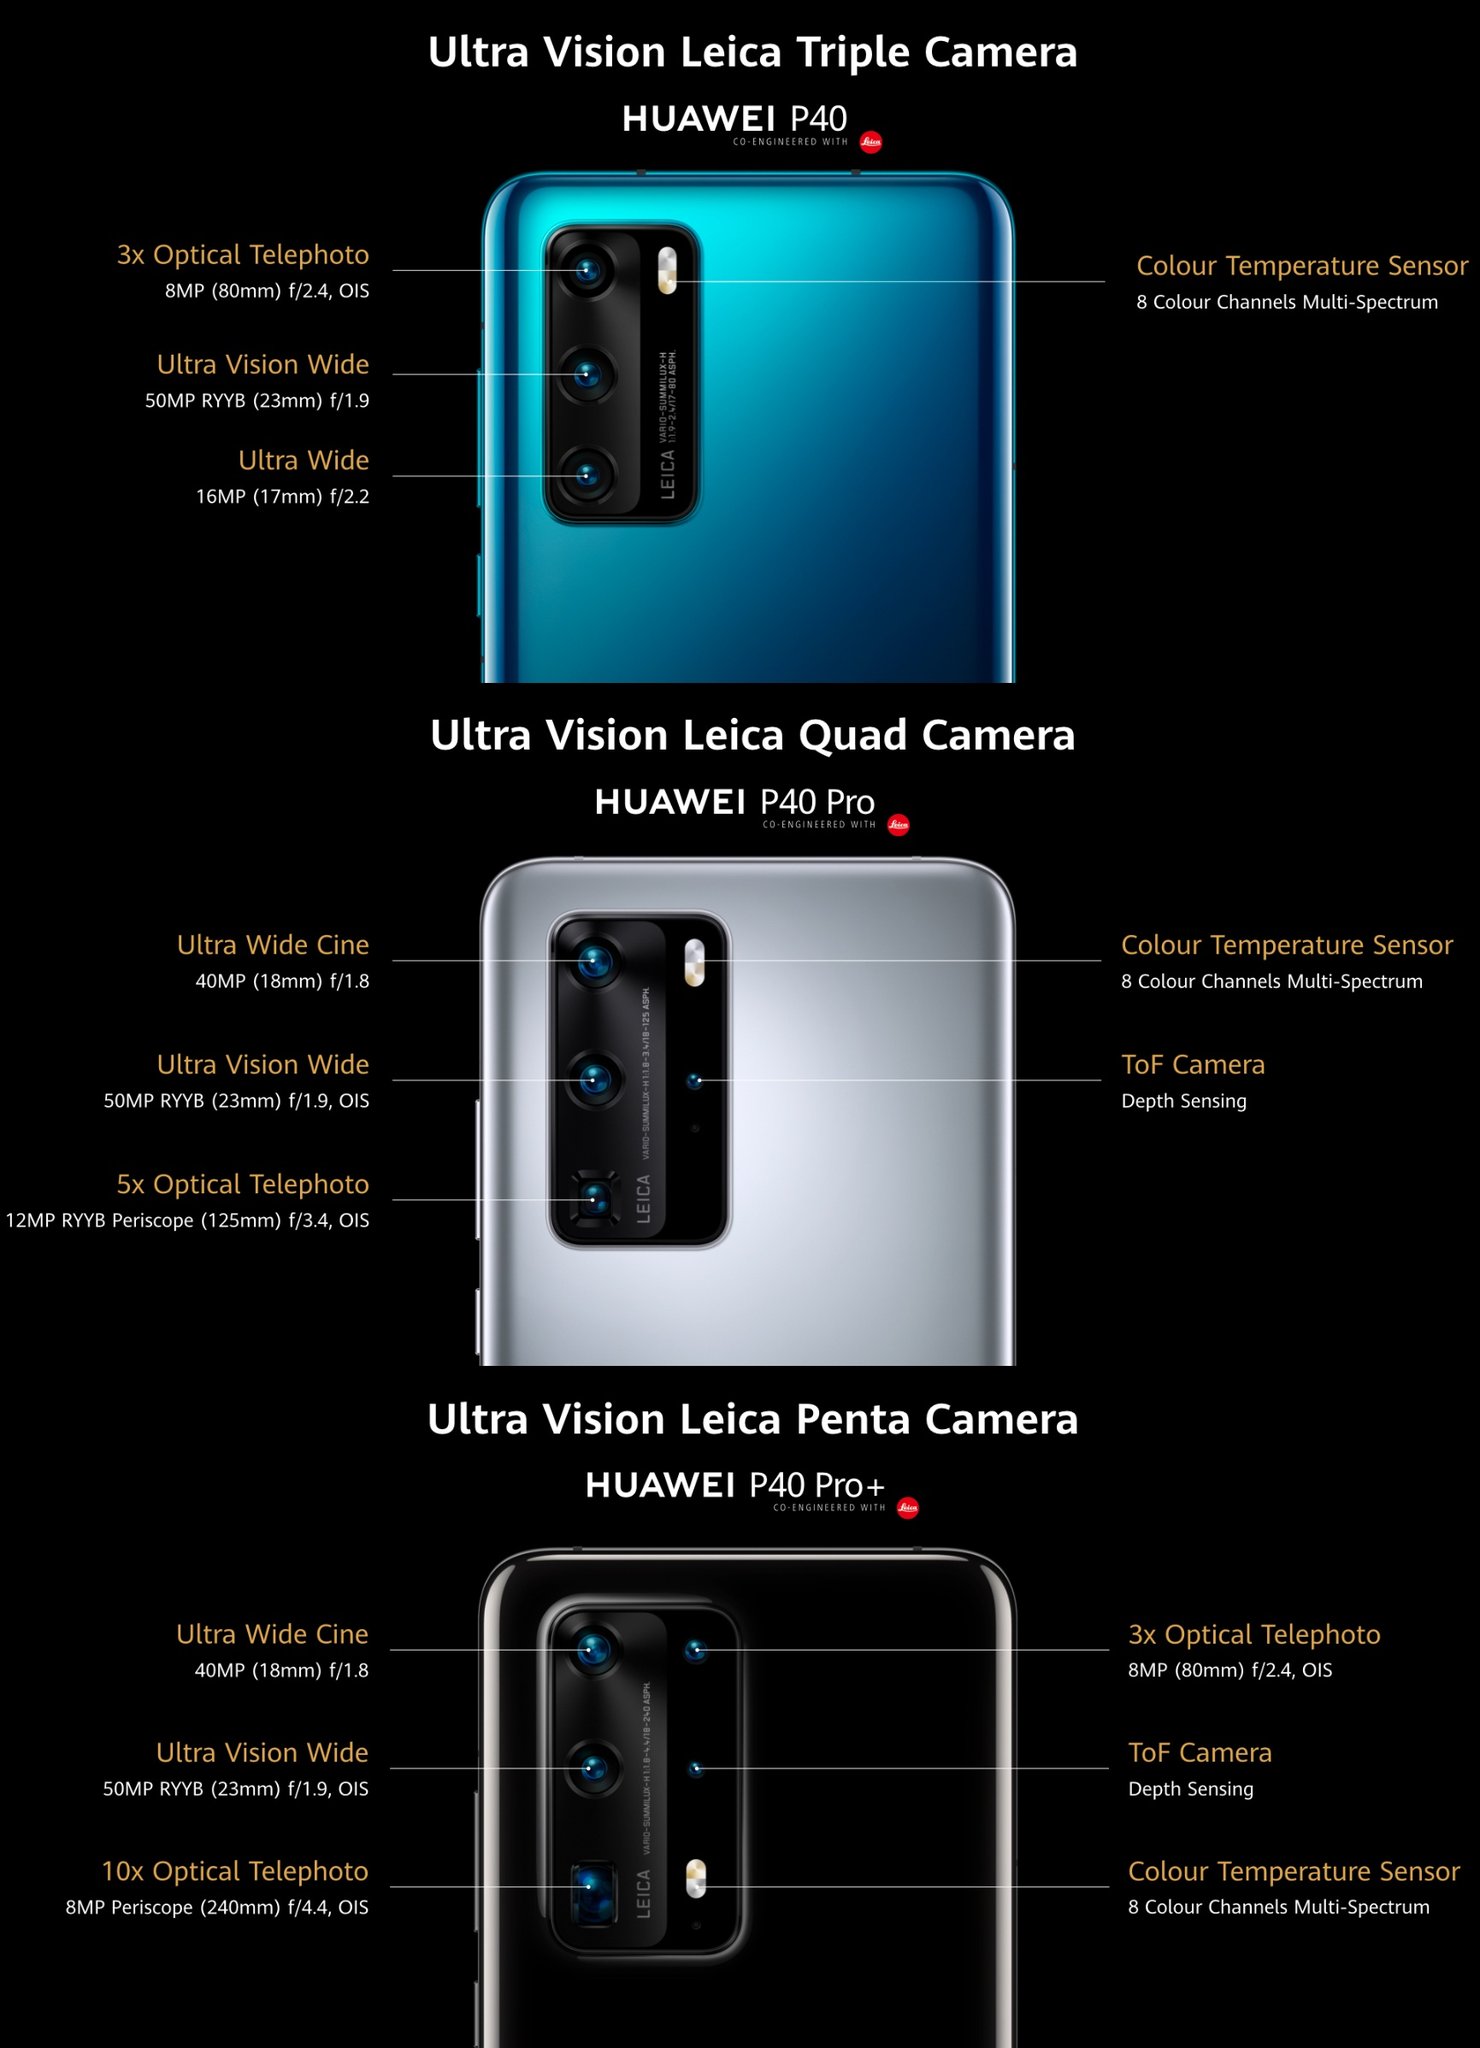 HUAWEI P40 Pro - Full Hardware Specs, Features, Pricing and Availability